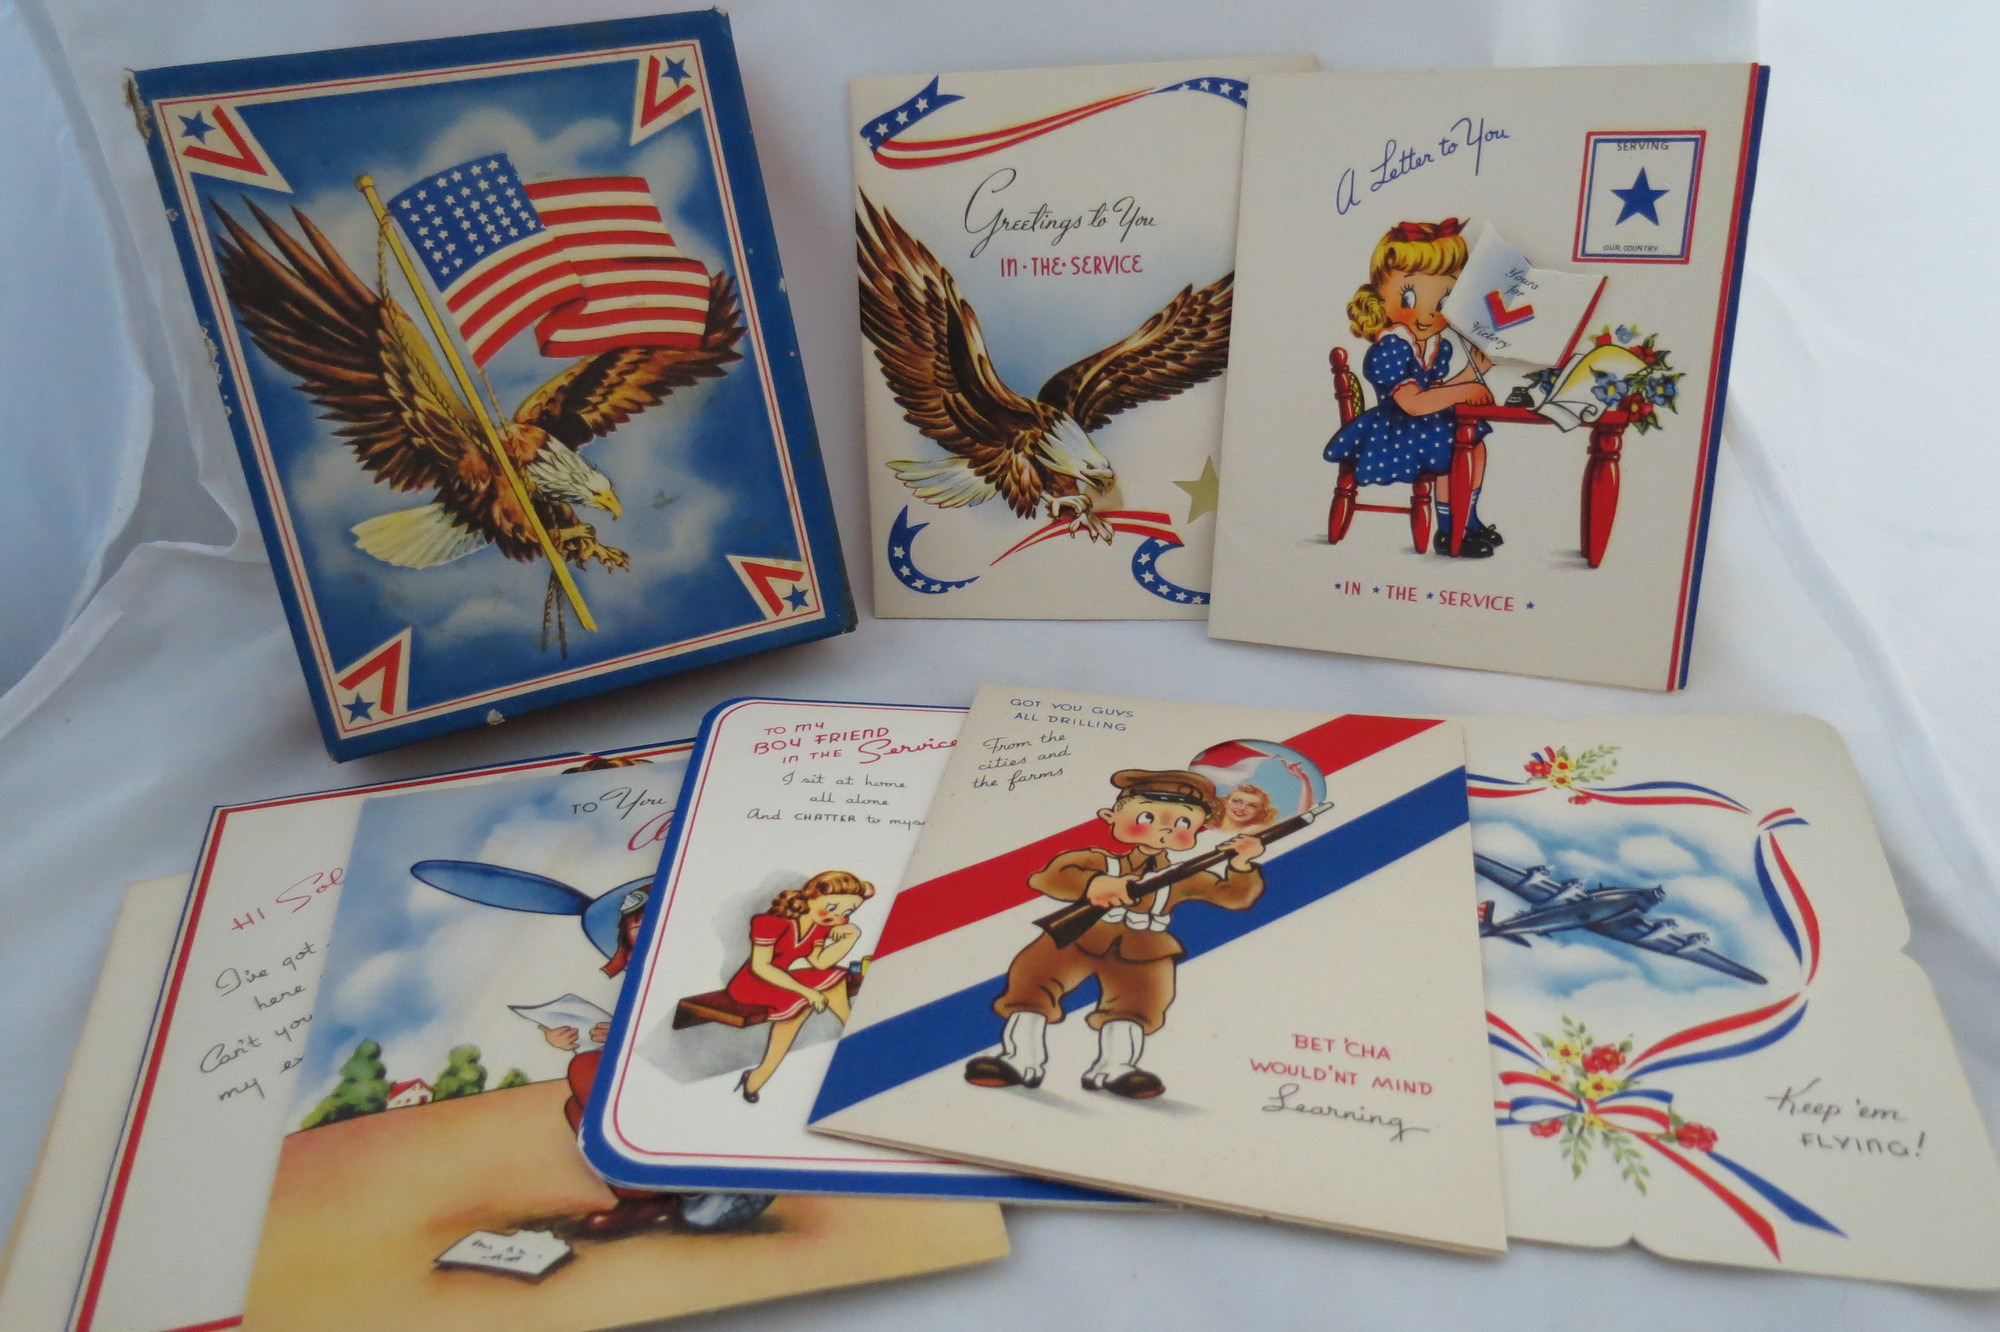 Image for WORLD WAR II (WWII) GREETING CARDS IN ORIGINAL BOX 7 Greeting Cards Including 'to My Boy Friend in the Service', 'got You Guys all Drilling', Good Luck Keep 'em Flying', 'greetings to You in the Service', 'a Letter to You in the Service', 'to You in the Airforce', 'hi Solider!